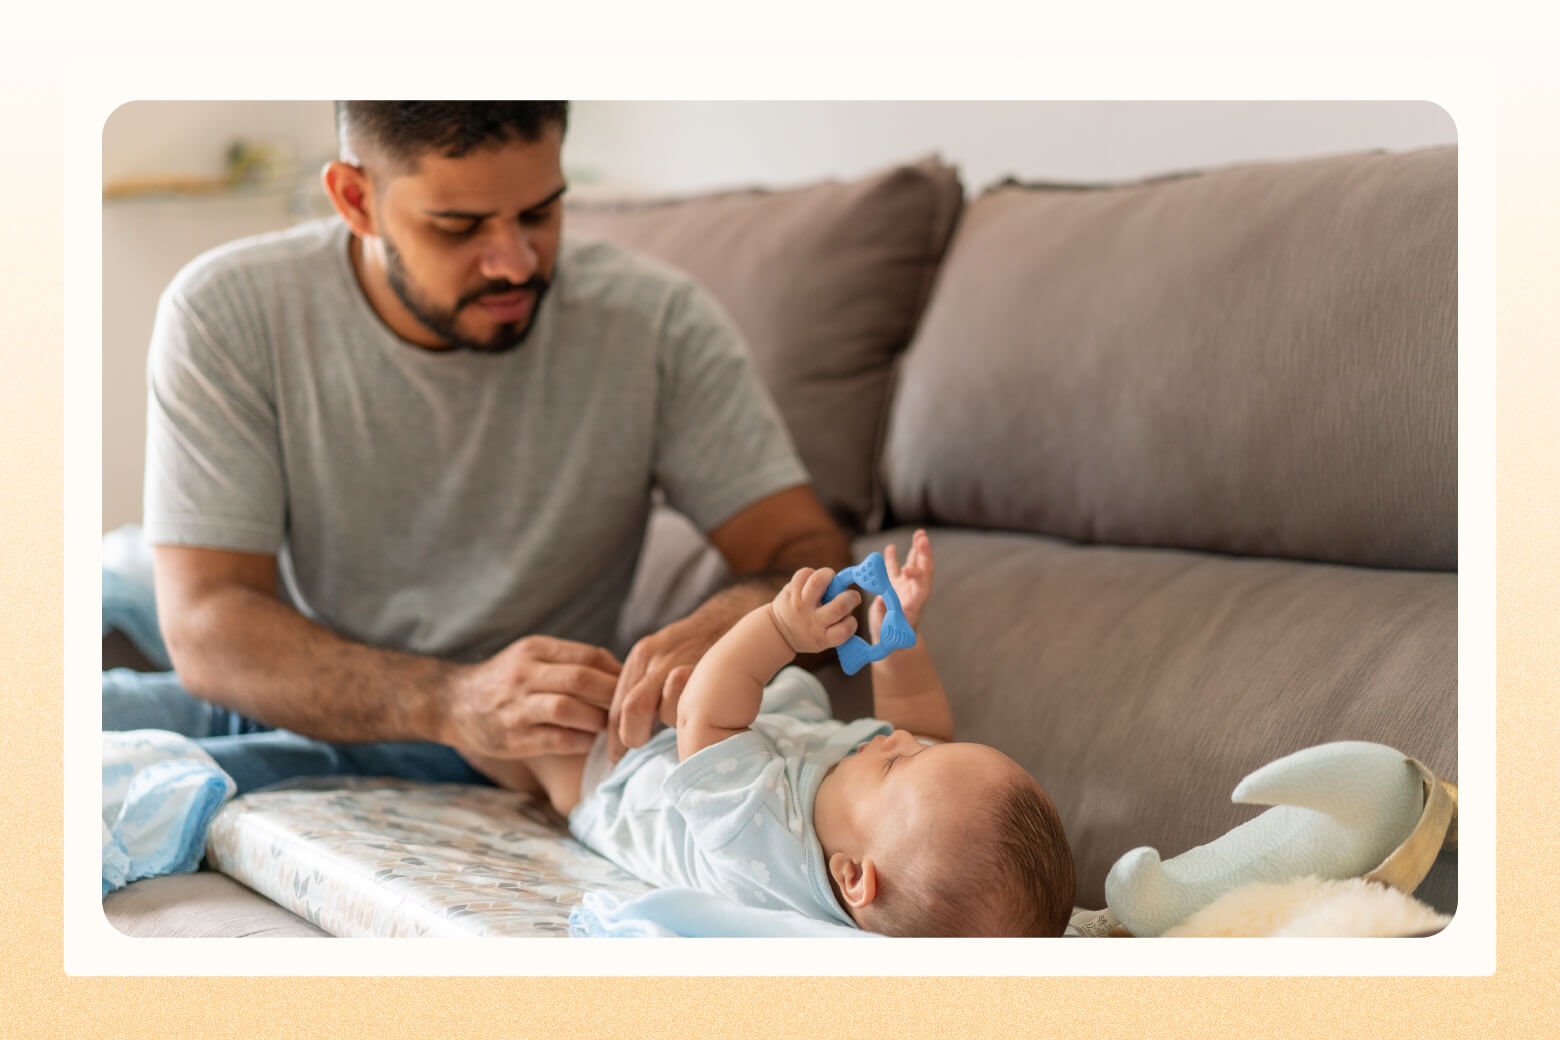 Dad changing baby's diaper on a changing pad laid on a sofa